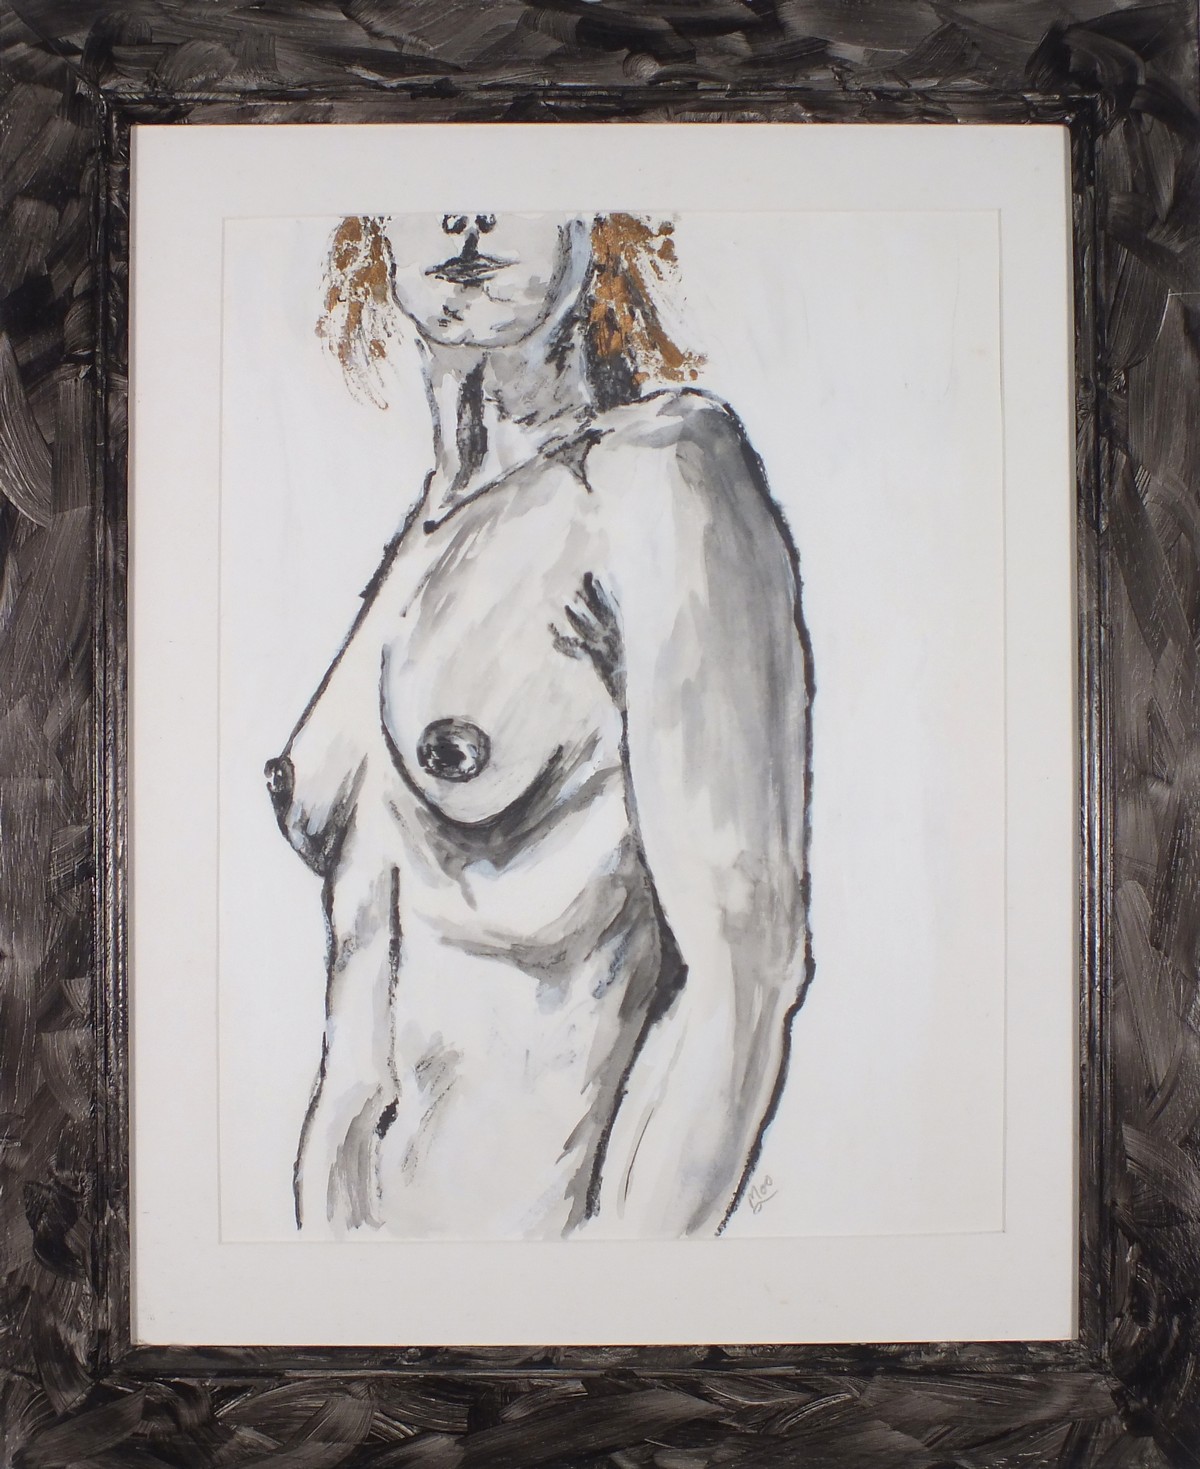 Mike MOORE (British b. 1950) Am I Too Fat?, Graphite and tea, Signed lower right, signed and - Image 2 of 3